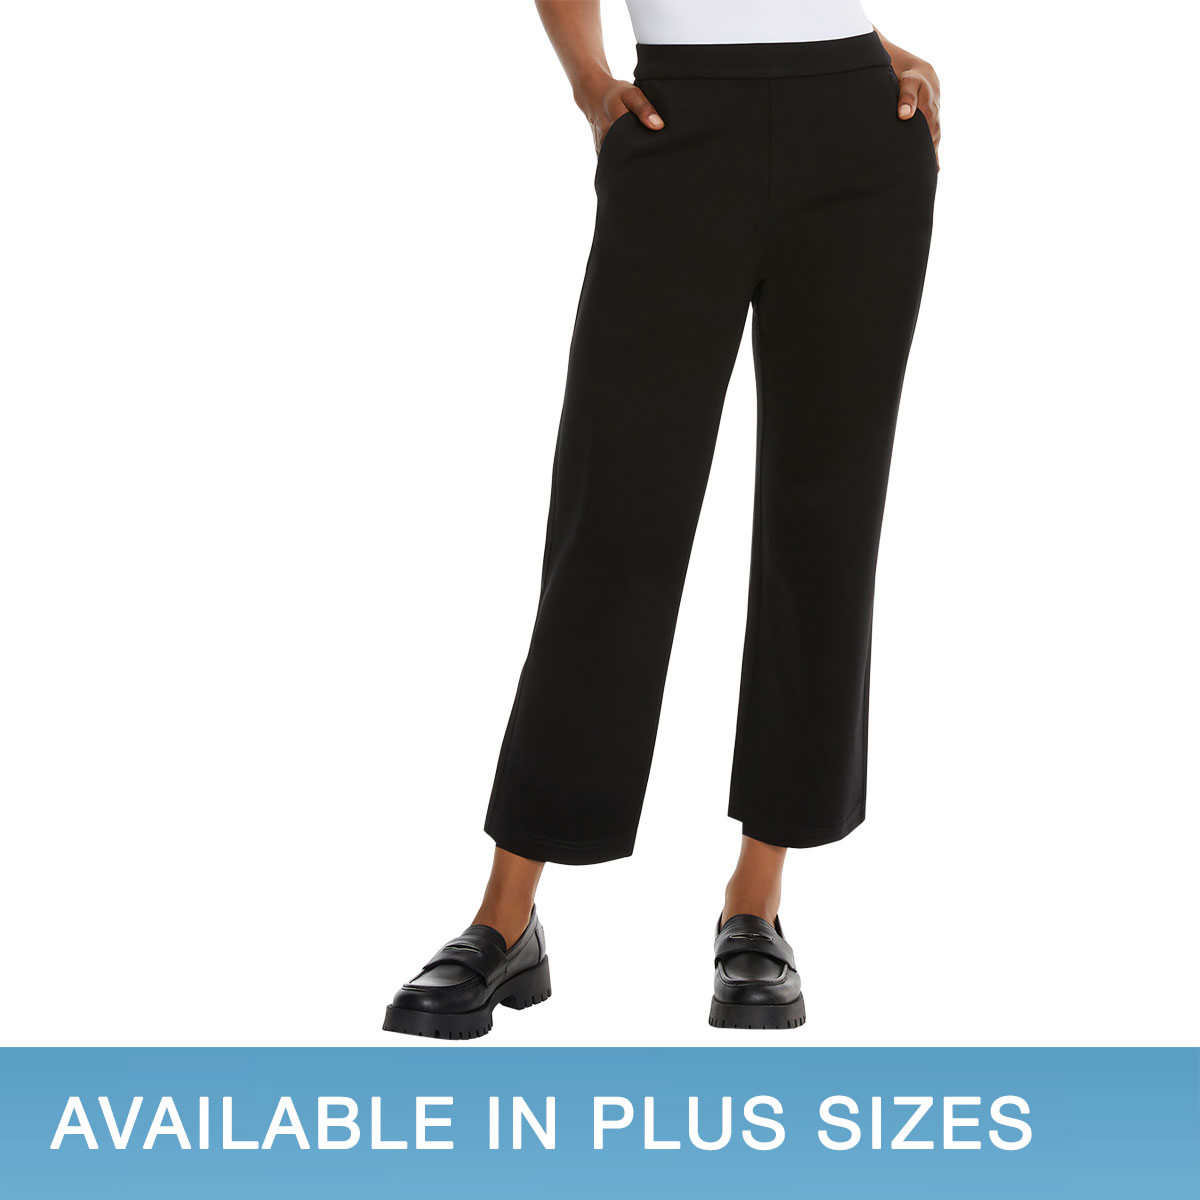 Wide Leg Pants With a High Waist in Tencel and Organic Cotton Stretch  French Terry, Made to Order -  Canada